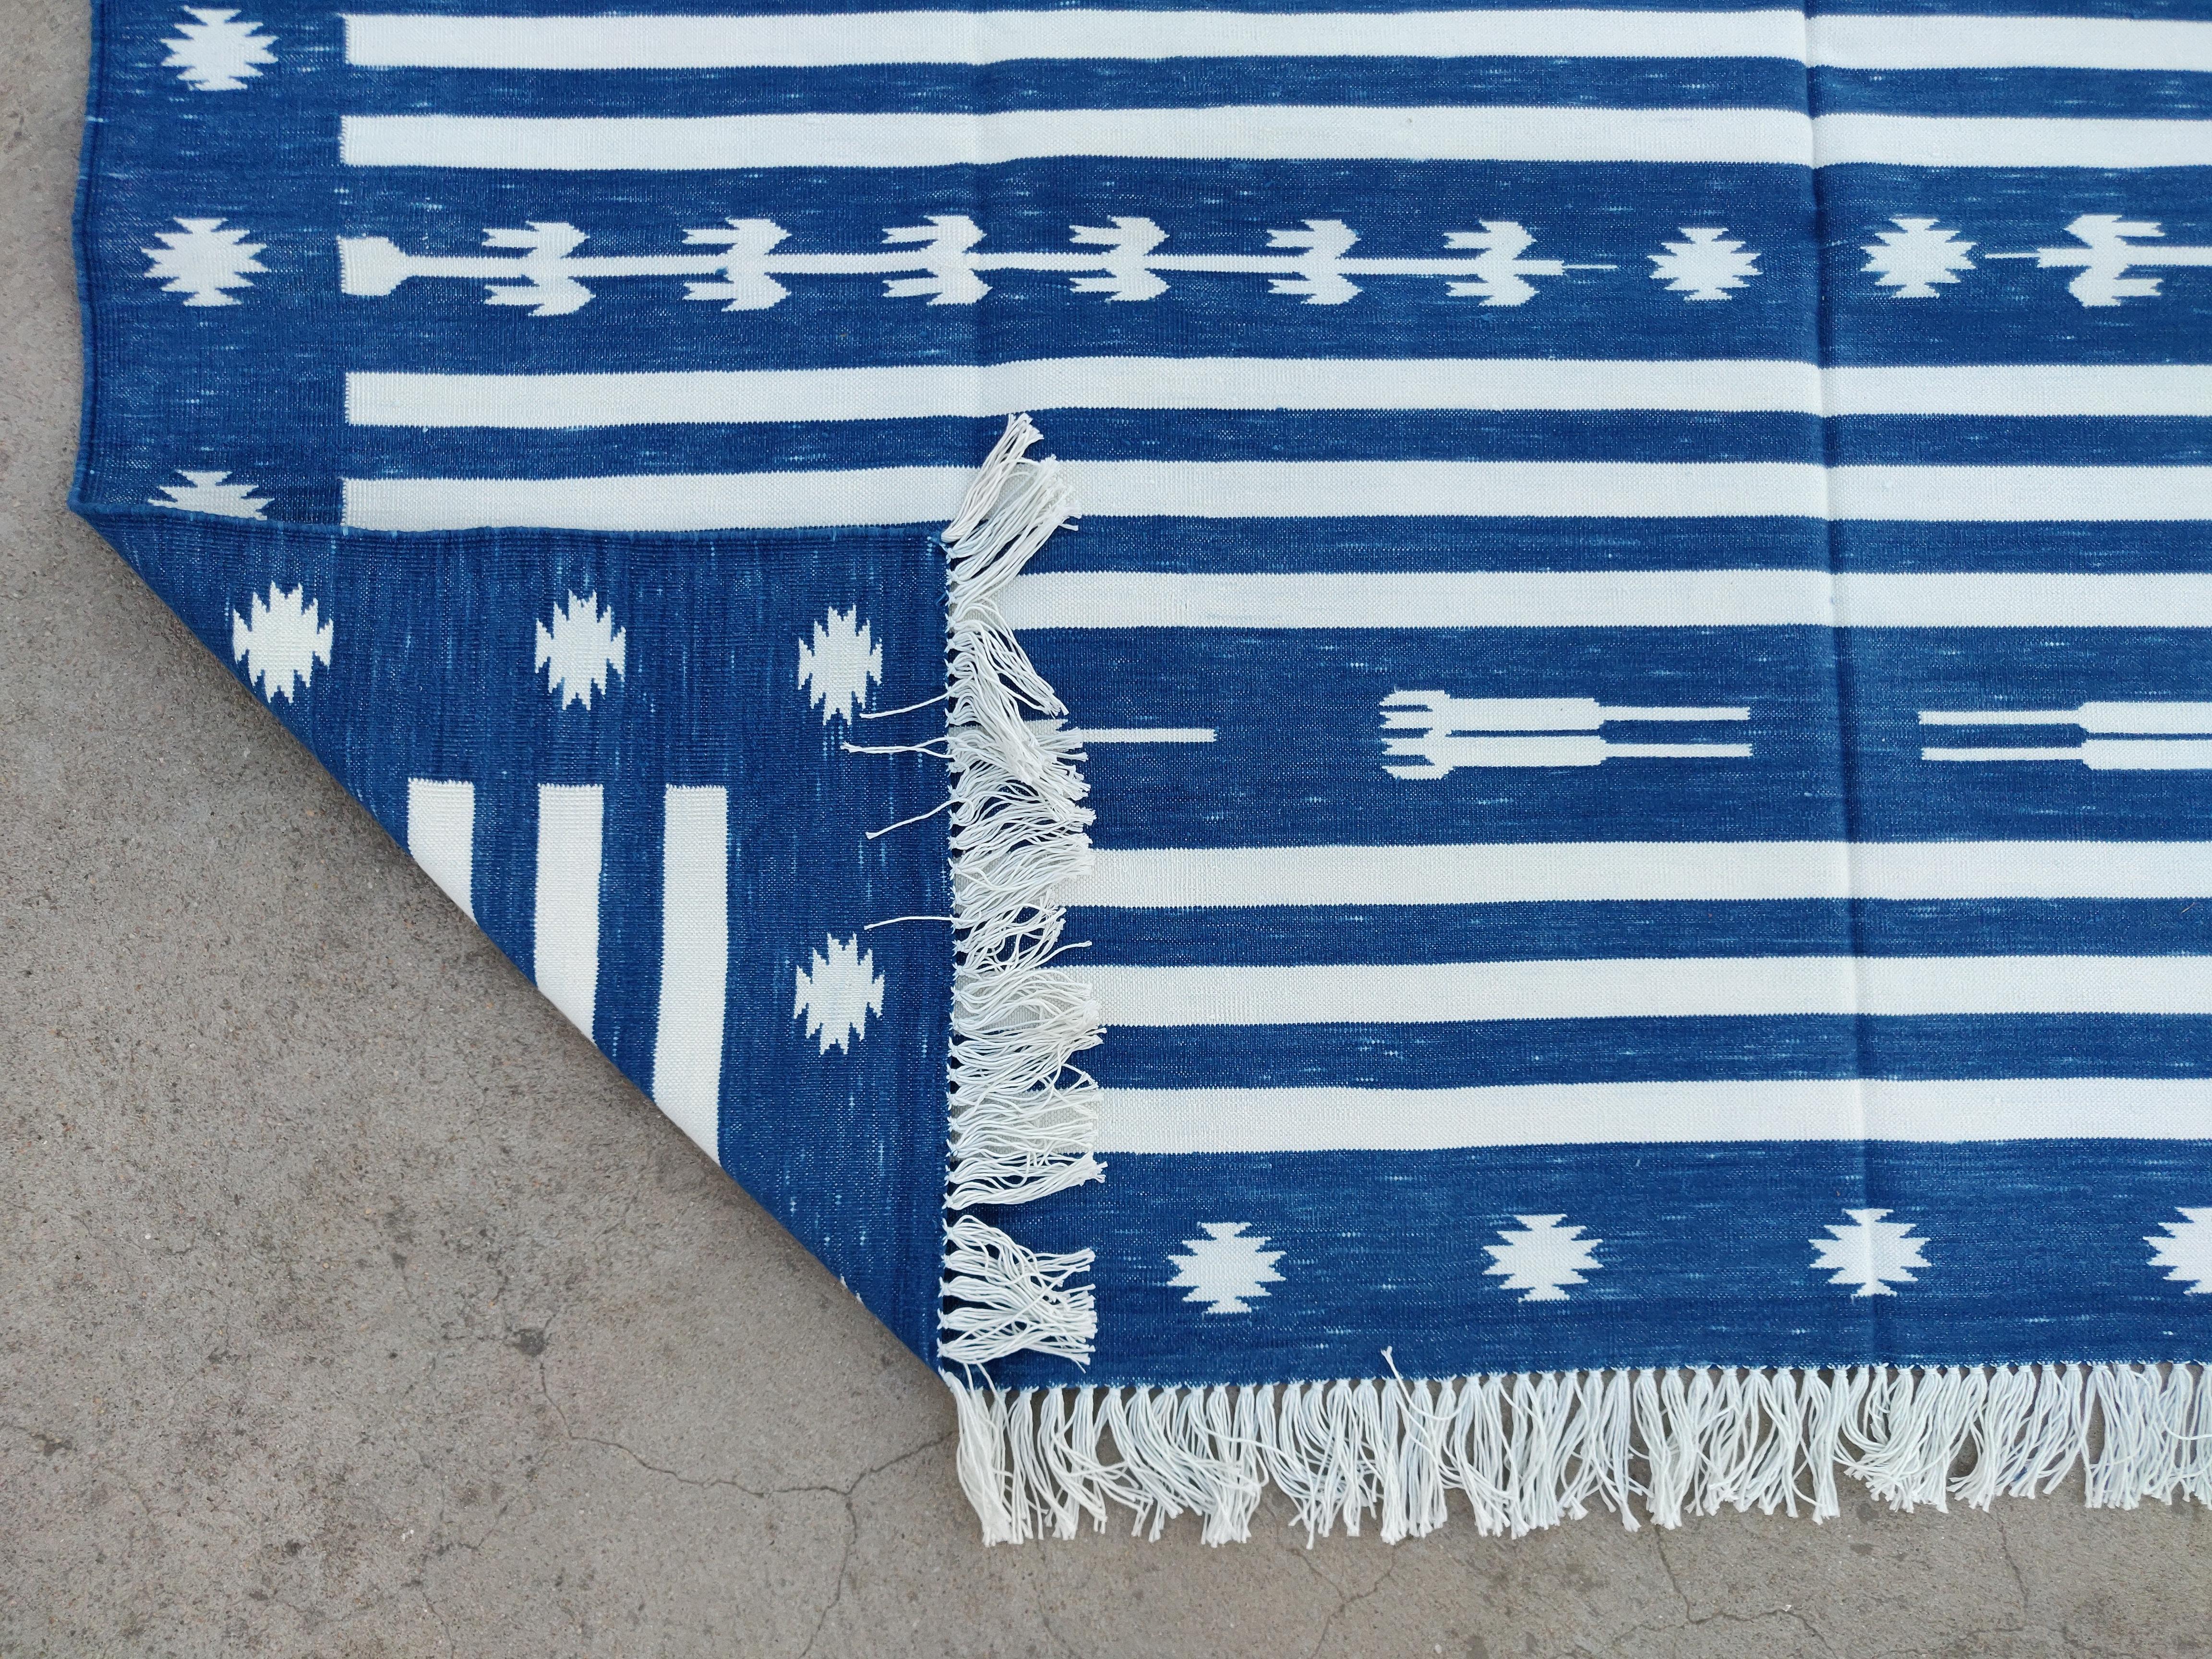 Handmade Cotton Area Flat Weave Rug, 6x9 Blue And White Striped Indian Dhurrie For Sale 3